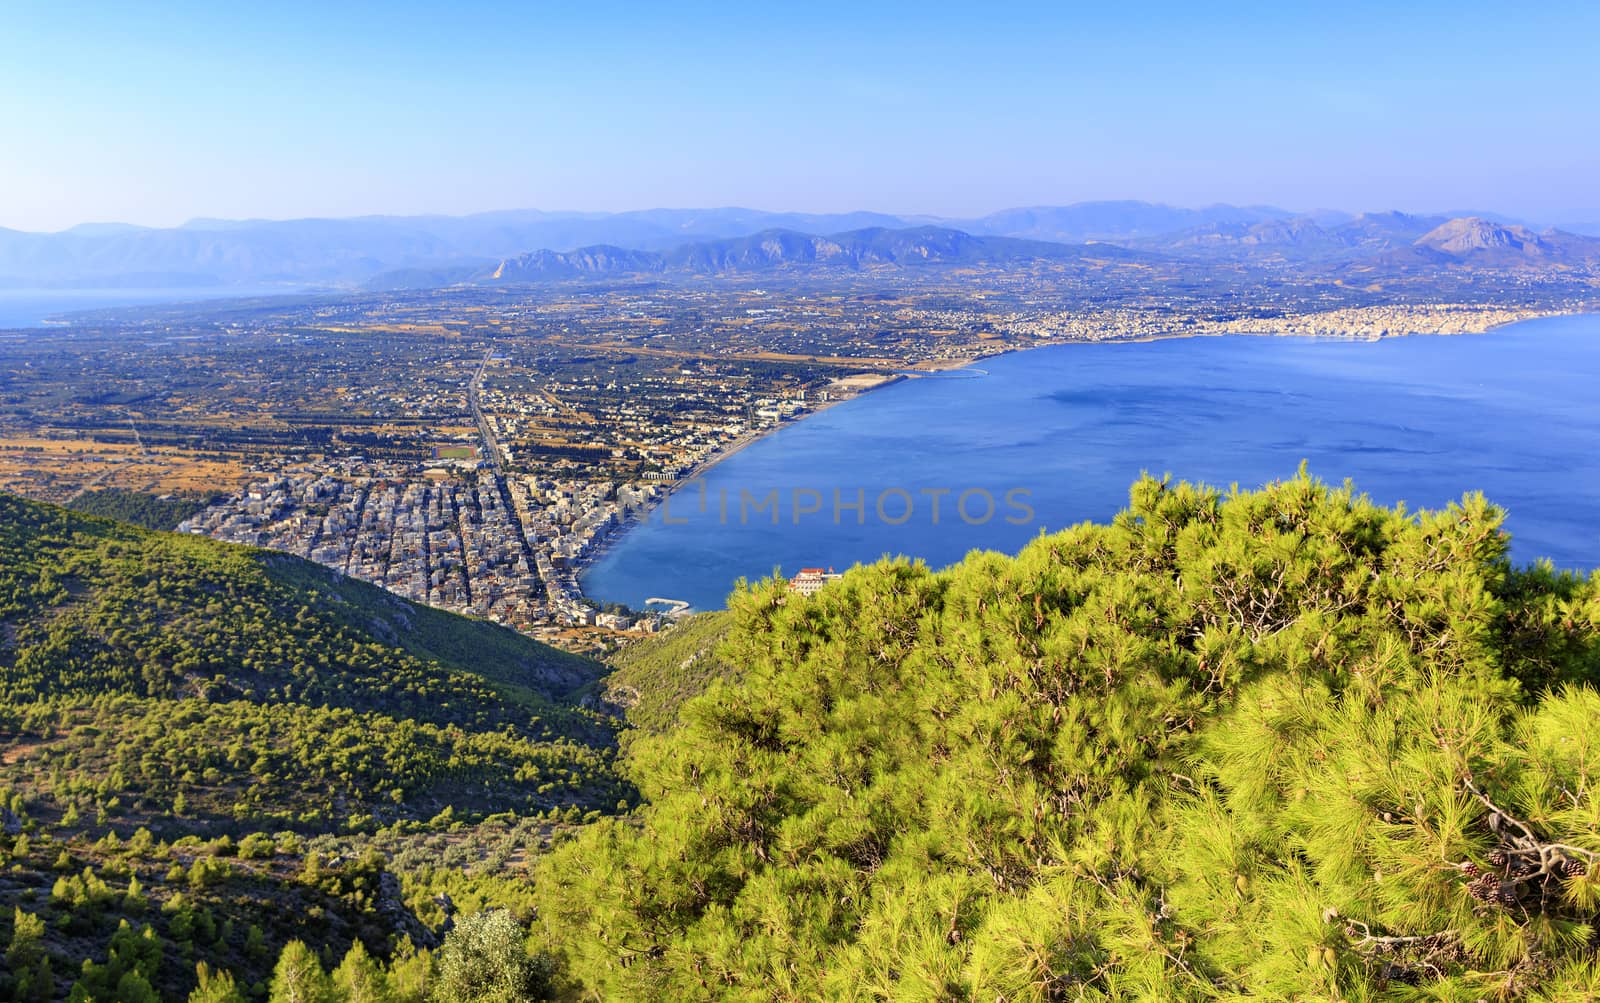 Beautiful fluffy spruce branch with cones in bright sunlight against the backdrop of the city of Loutraki and the blurry sea of the blue Corinthian Gulf in Greece from a bird's eye view.